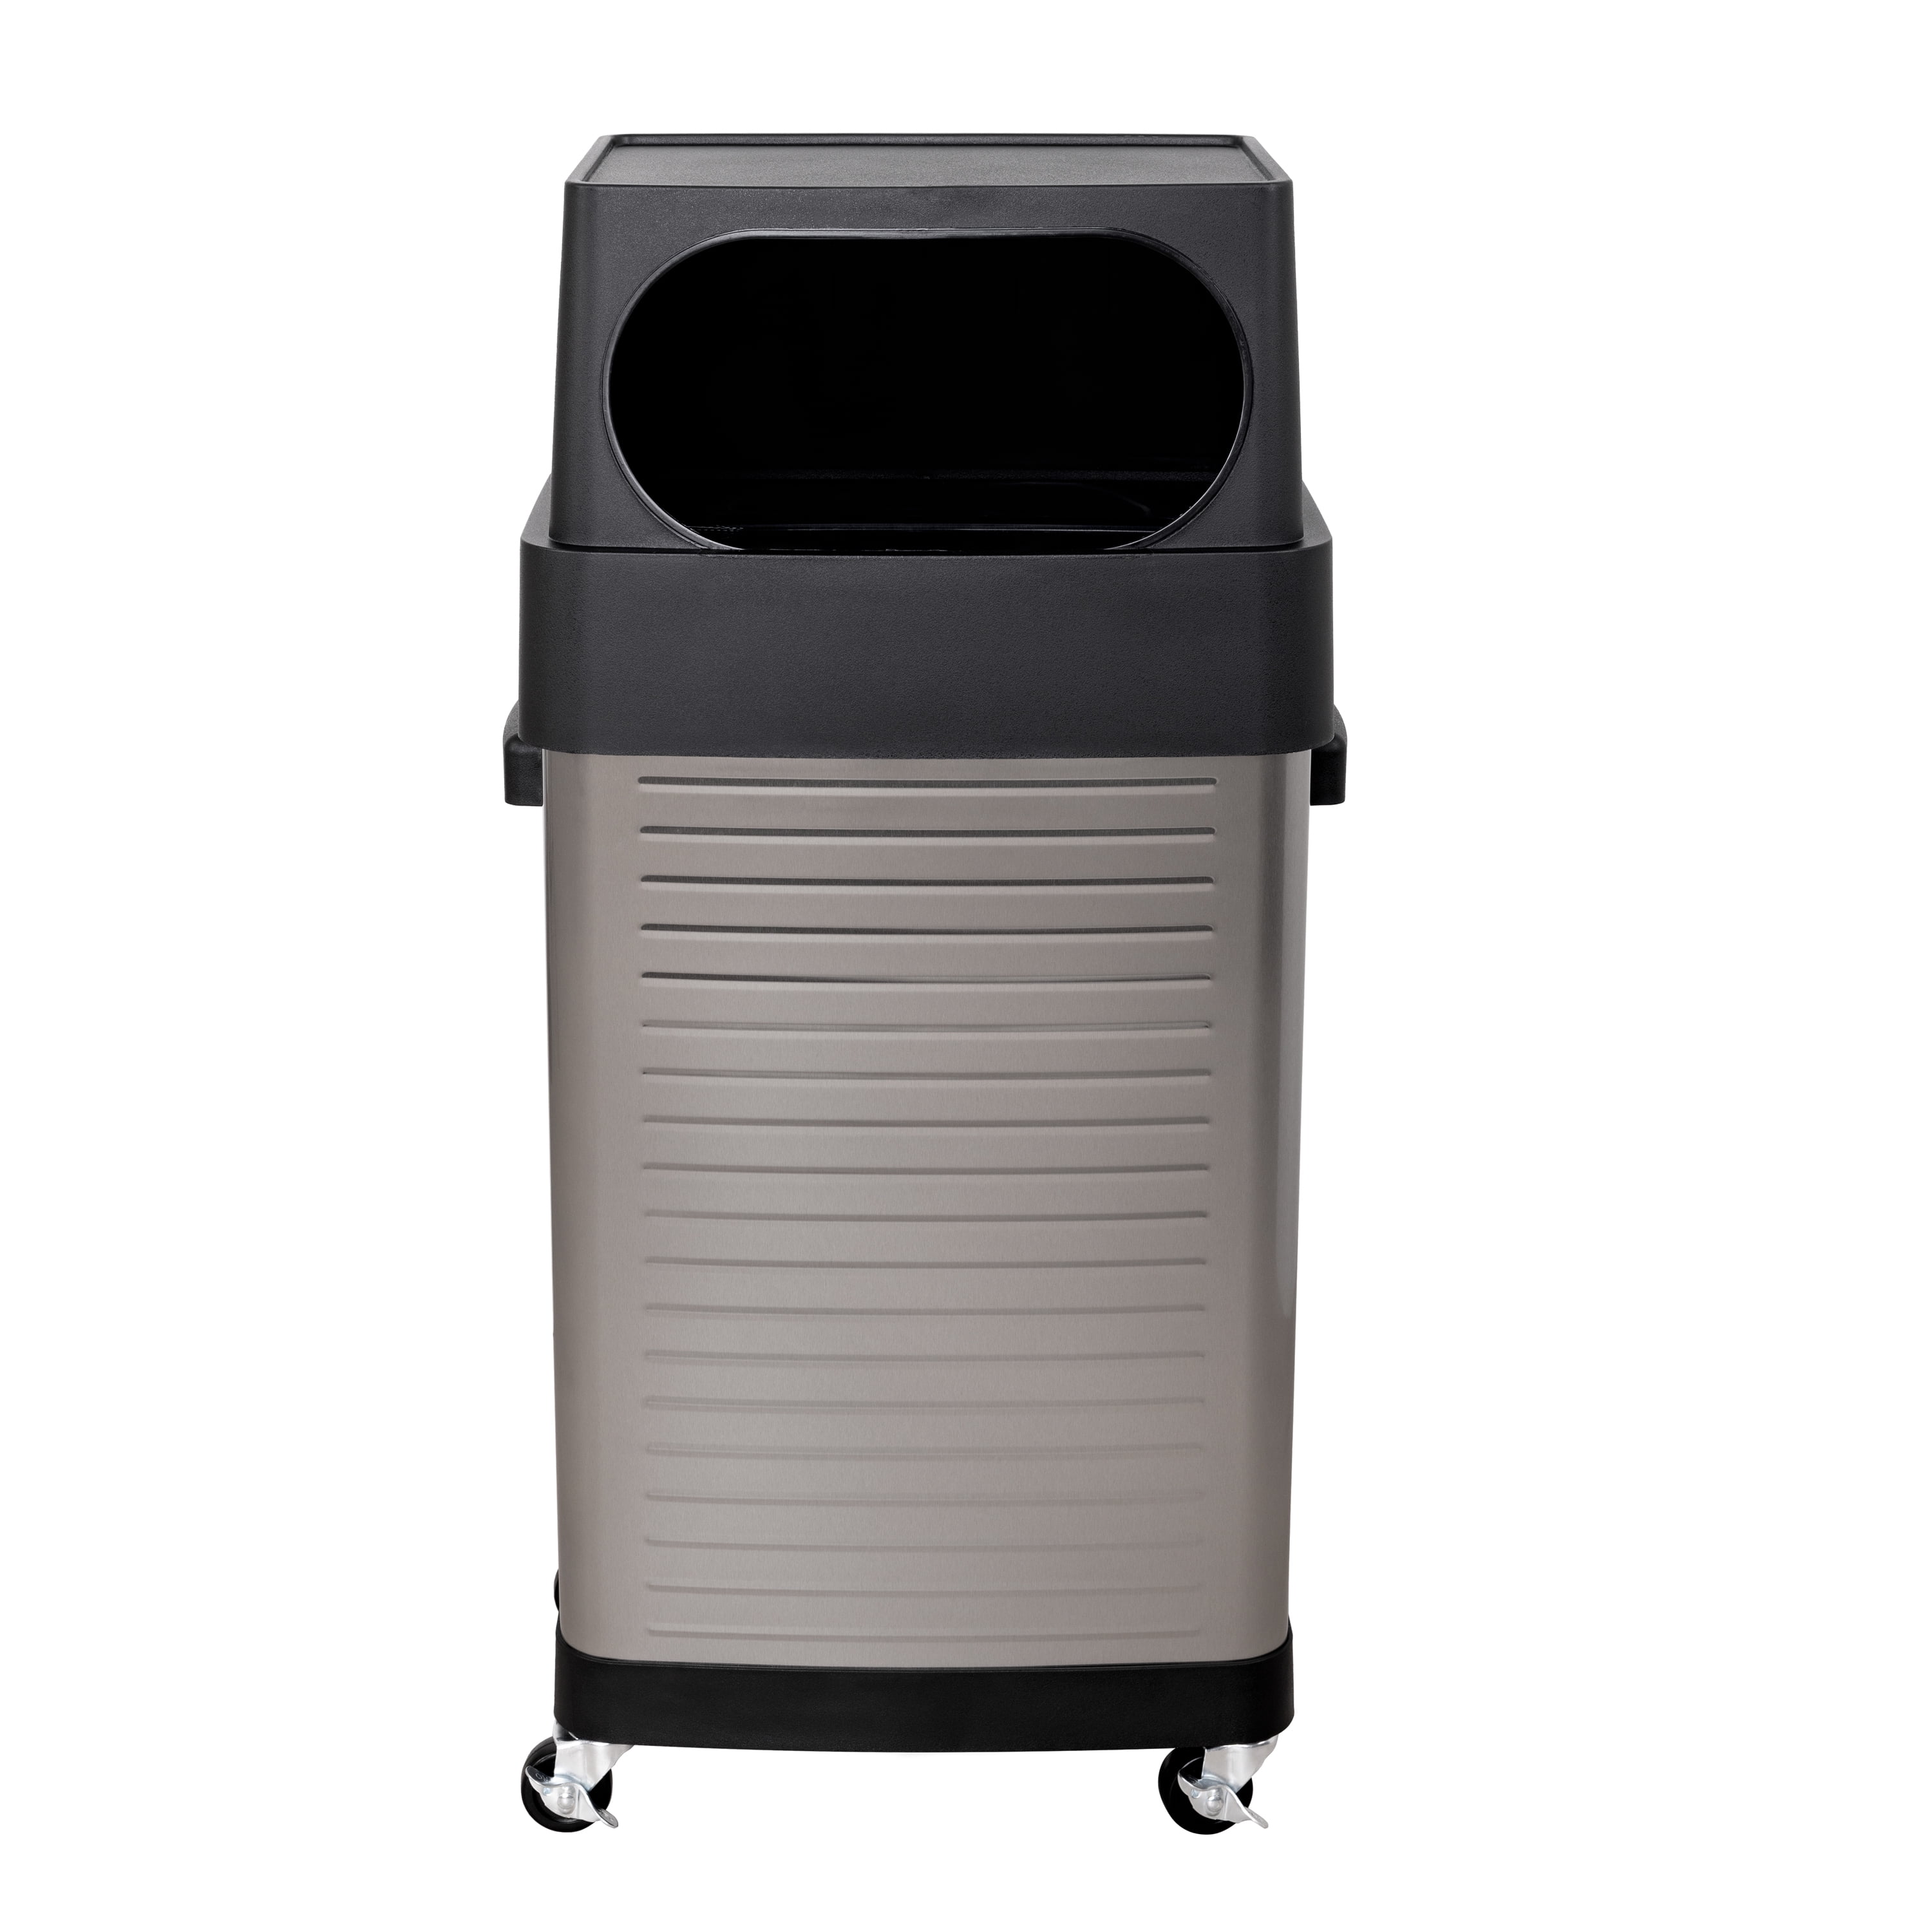 Cleanline Top Load Stainless Steel Trash Can - 39 Gallon